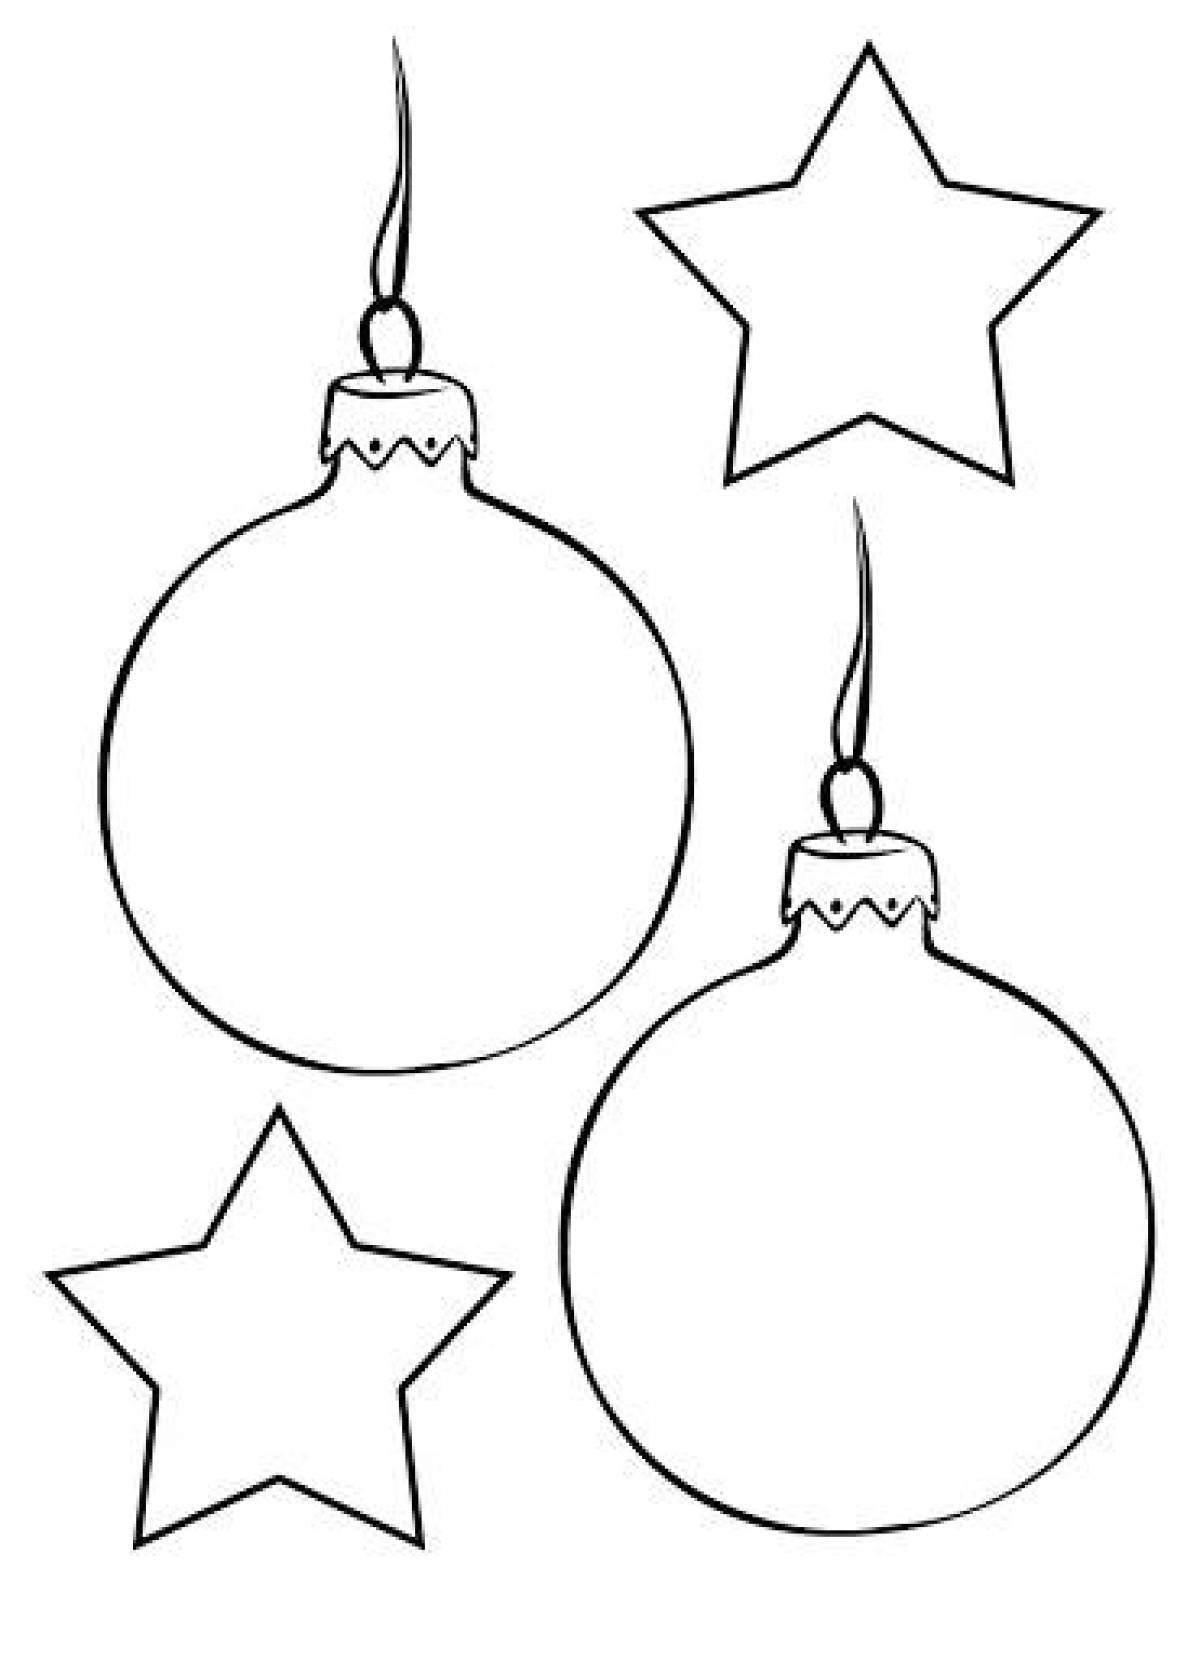 New Year's coloring pages for kids